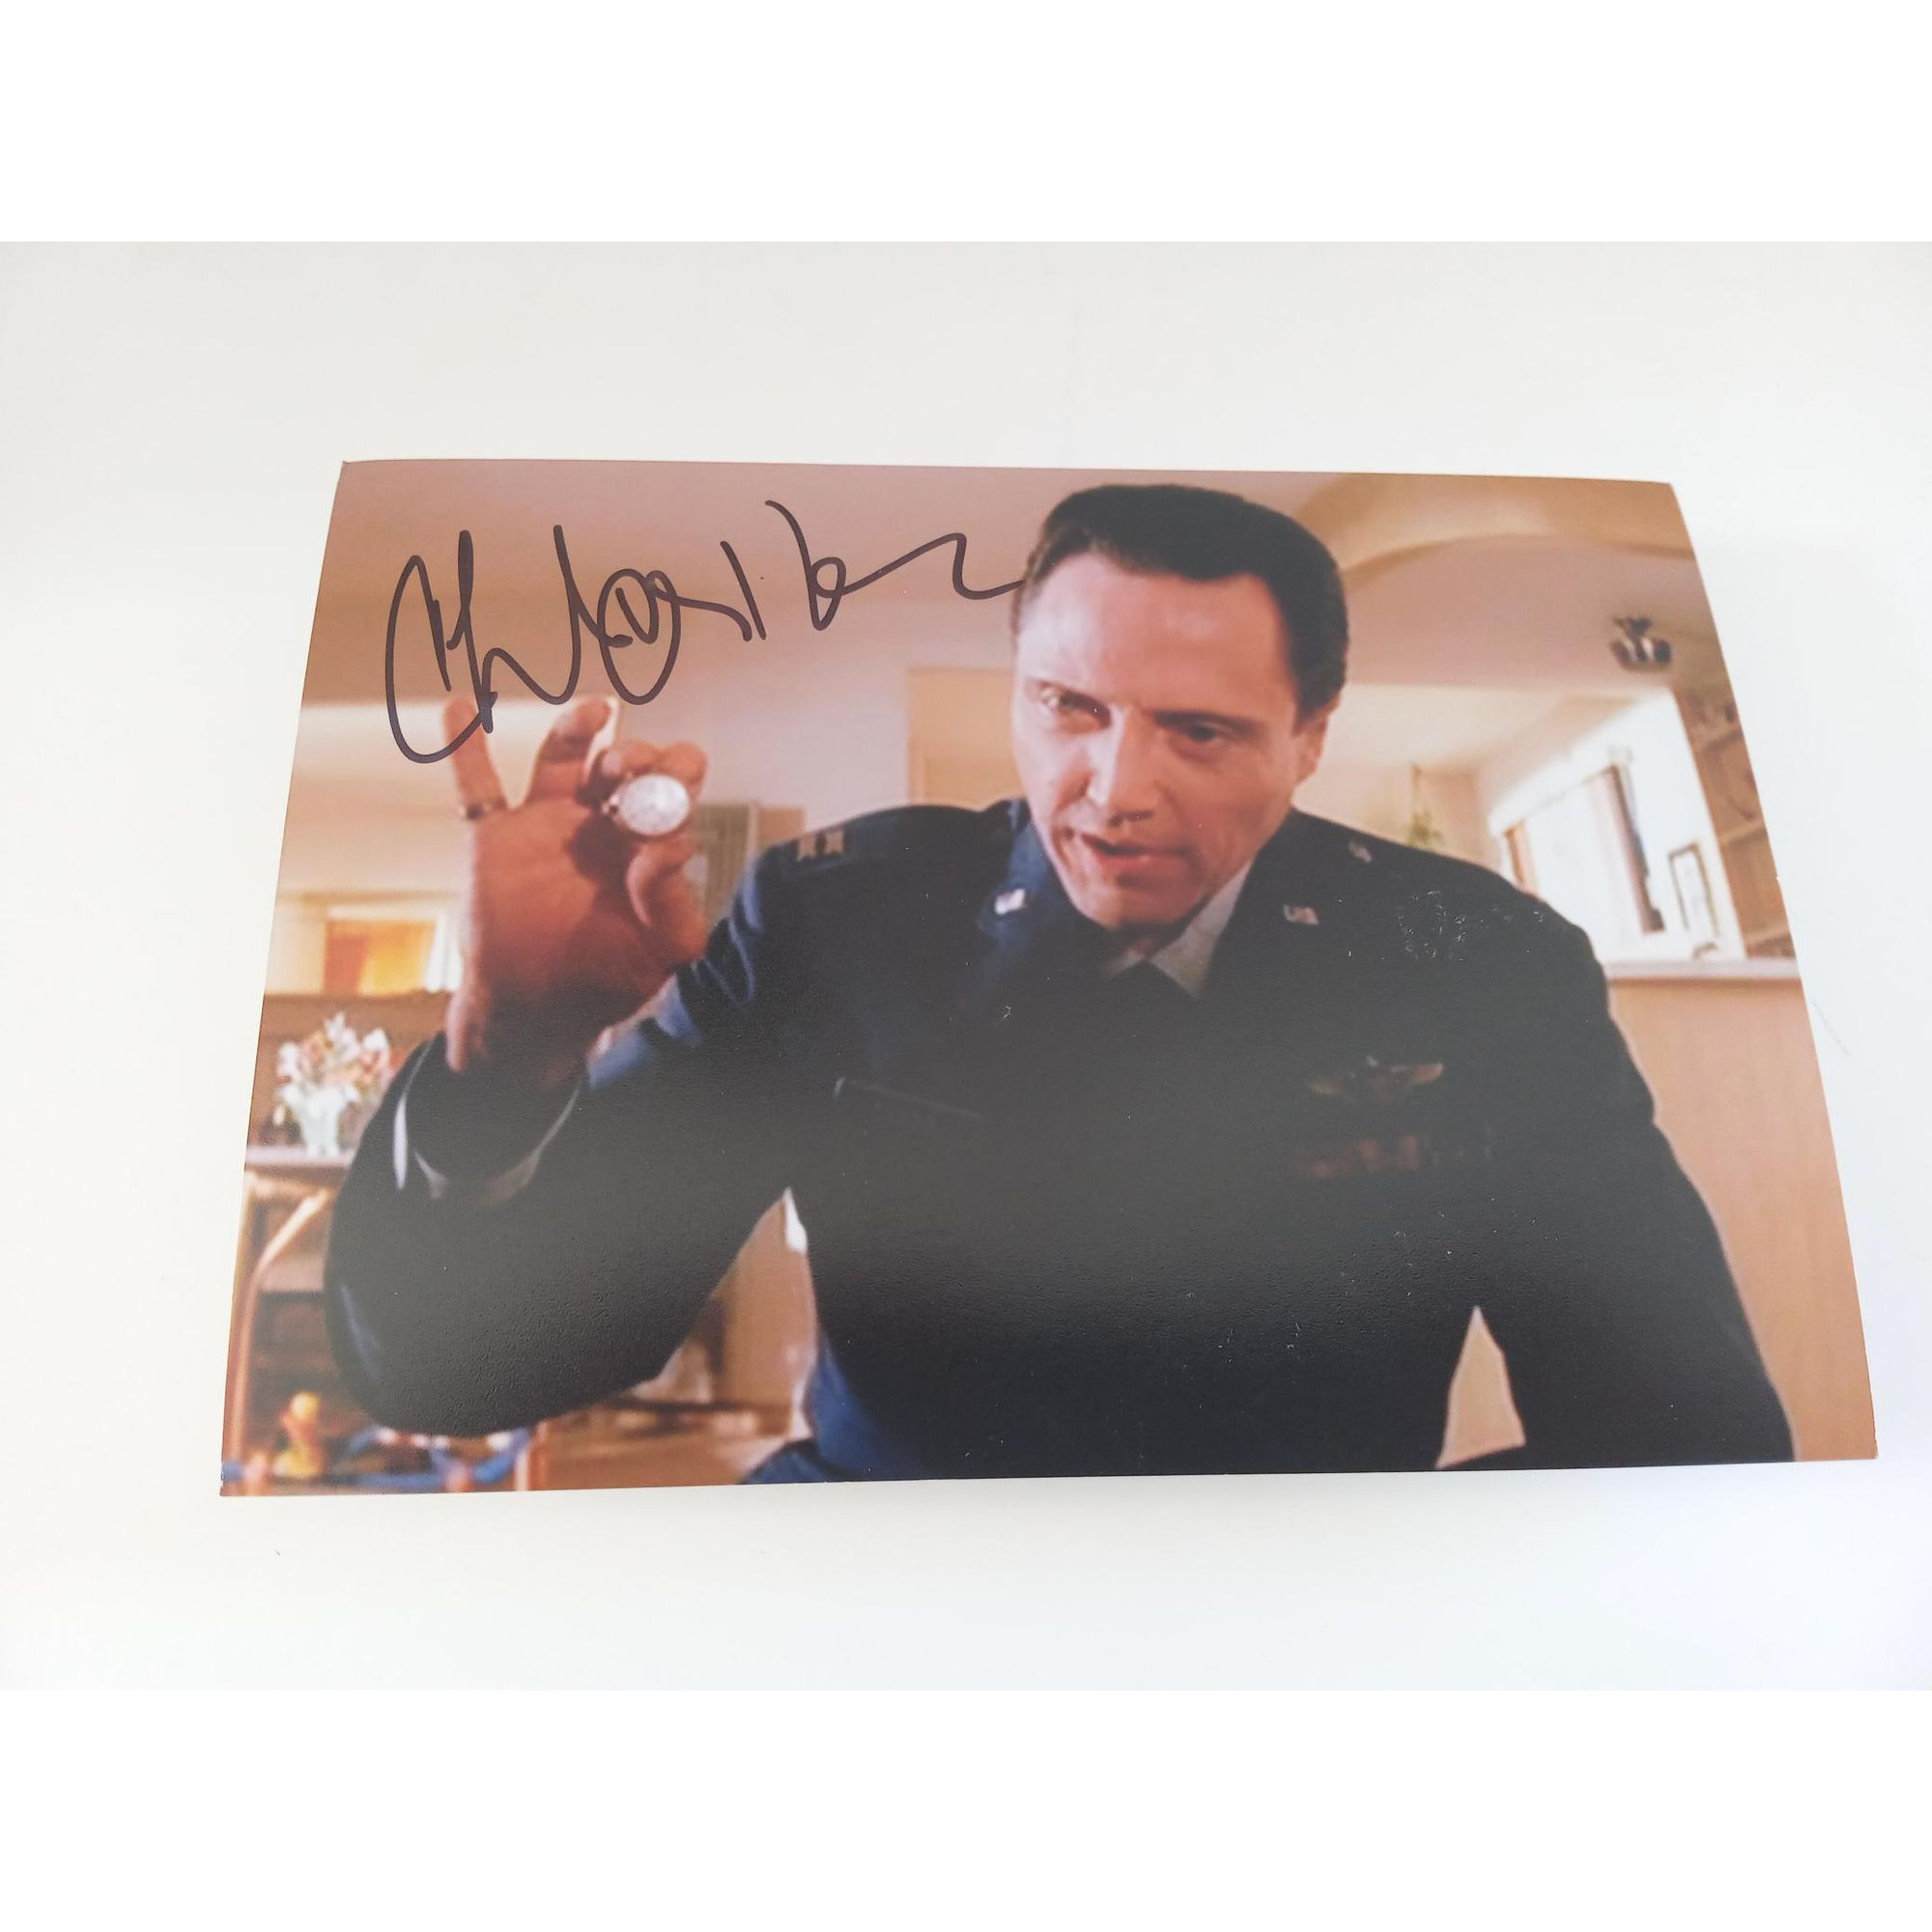 Christopher Walken Pulp Fiction 5X7 photo signed with proof